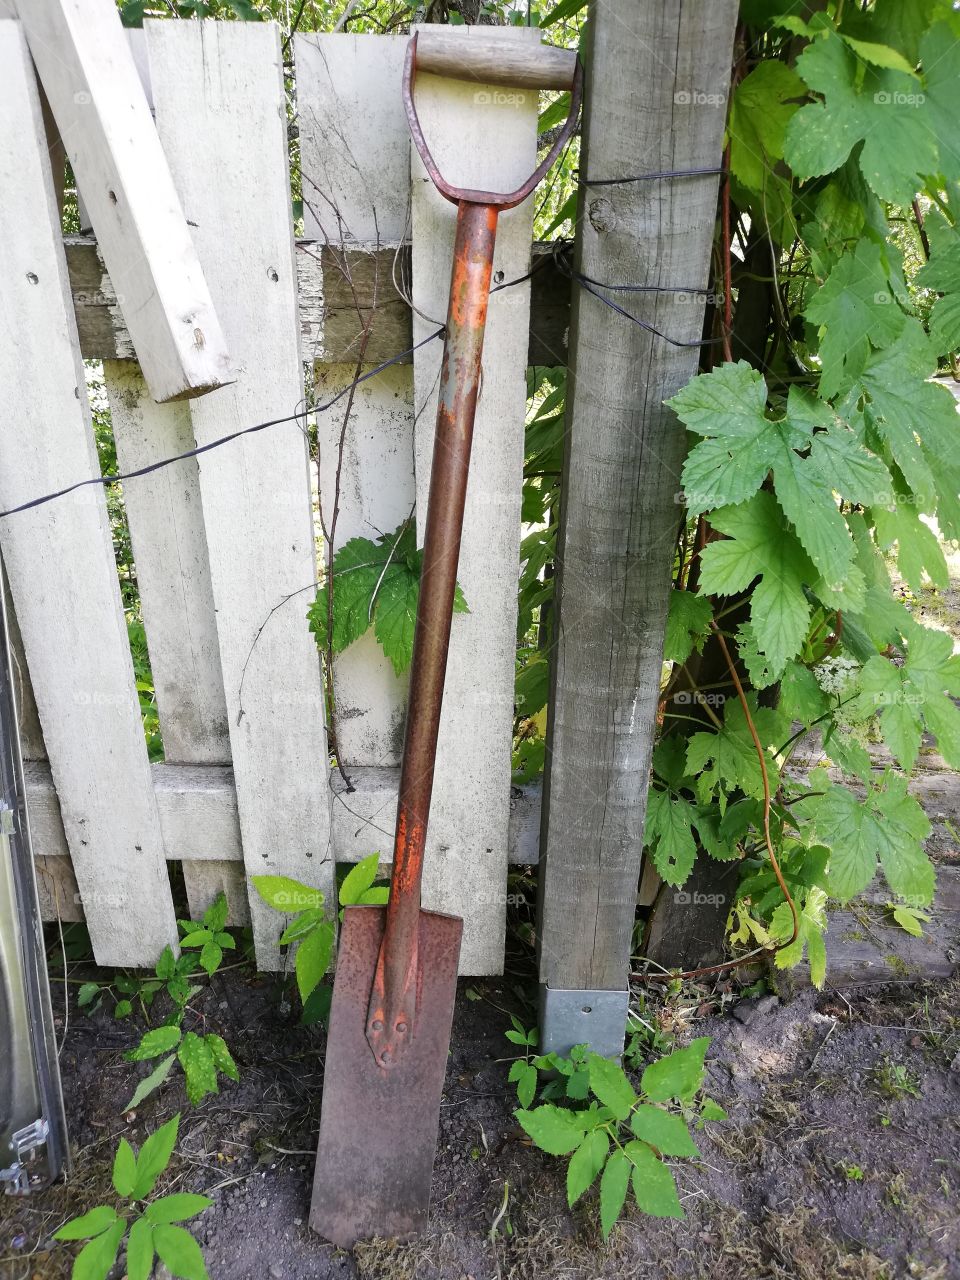 An old rusty spades, which iron part was earlier red, is inside the soil, leaning on the white board of the fence. A wooden handle. In a metallic fencepost an unpainted pole, green plants growing in the backyard.